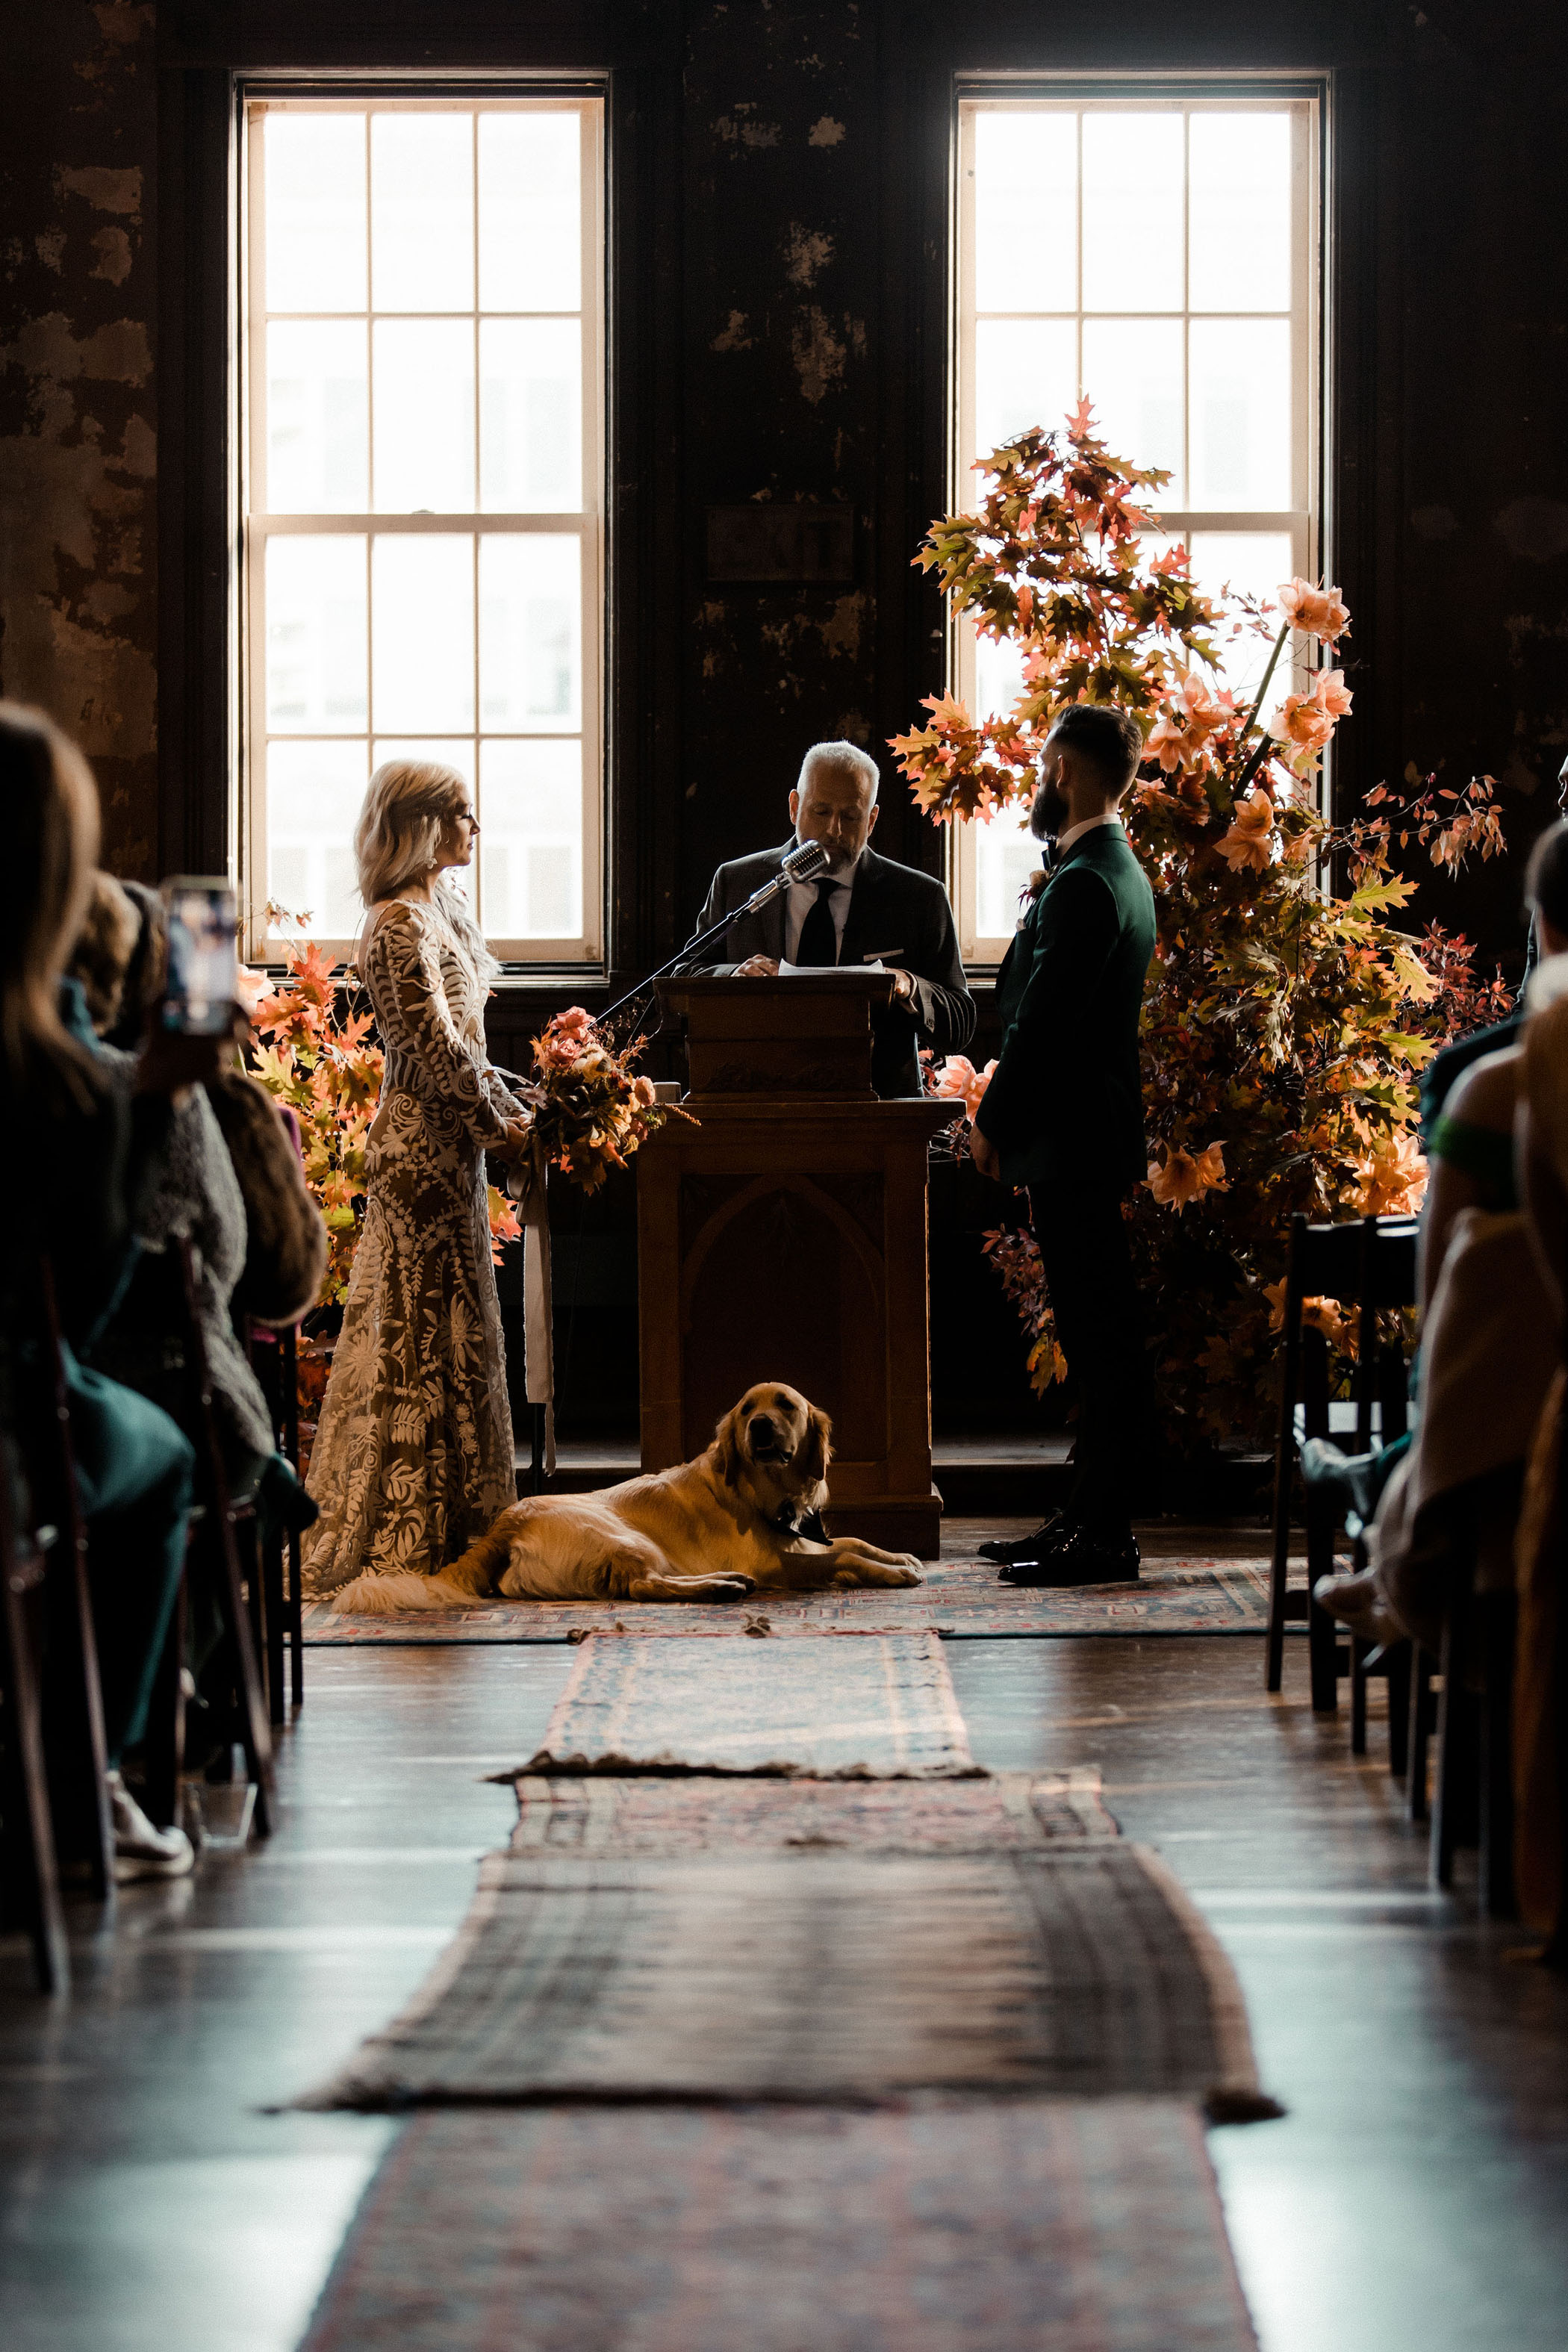 Bucks Fans Wedding in a Historical Music Milwaukee Hall Ceremony with Dog